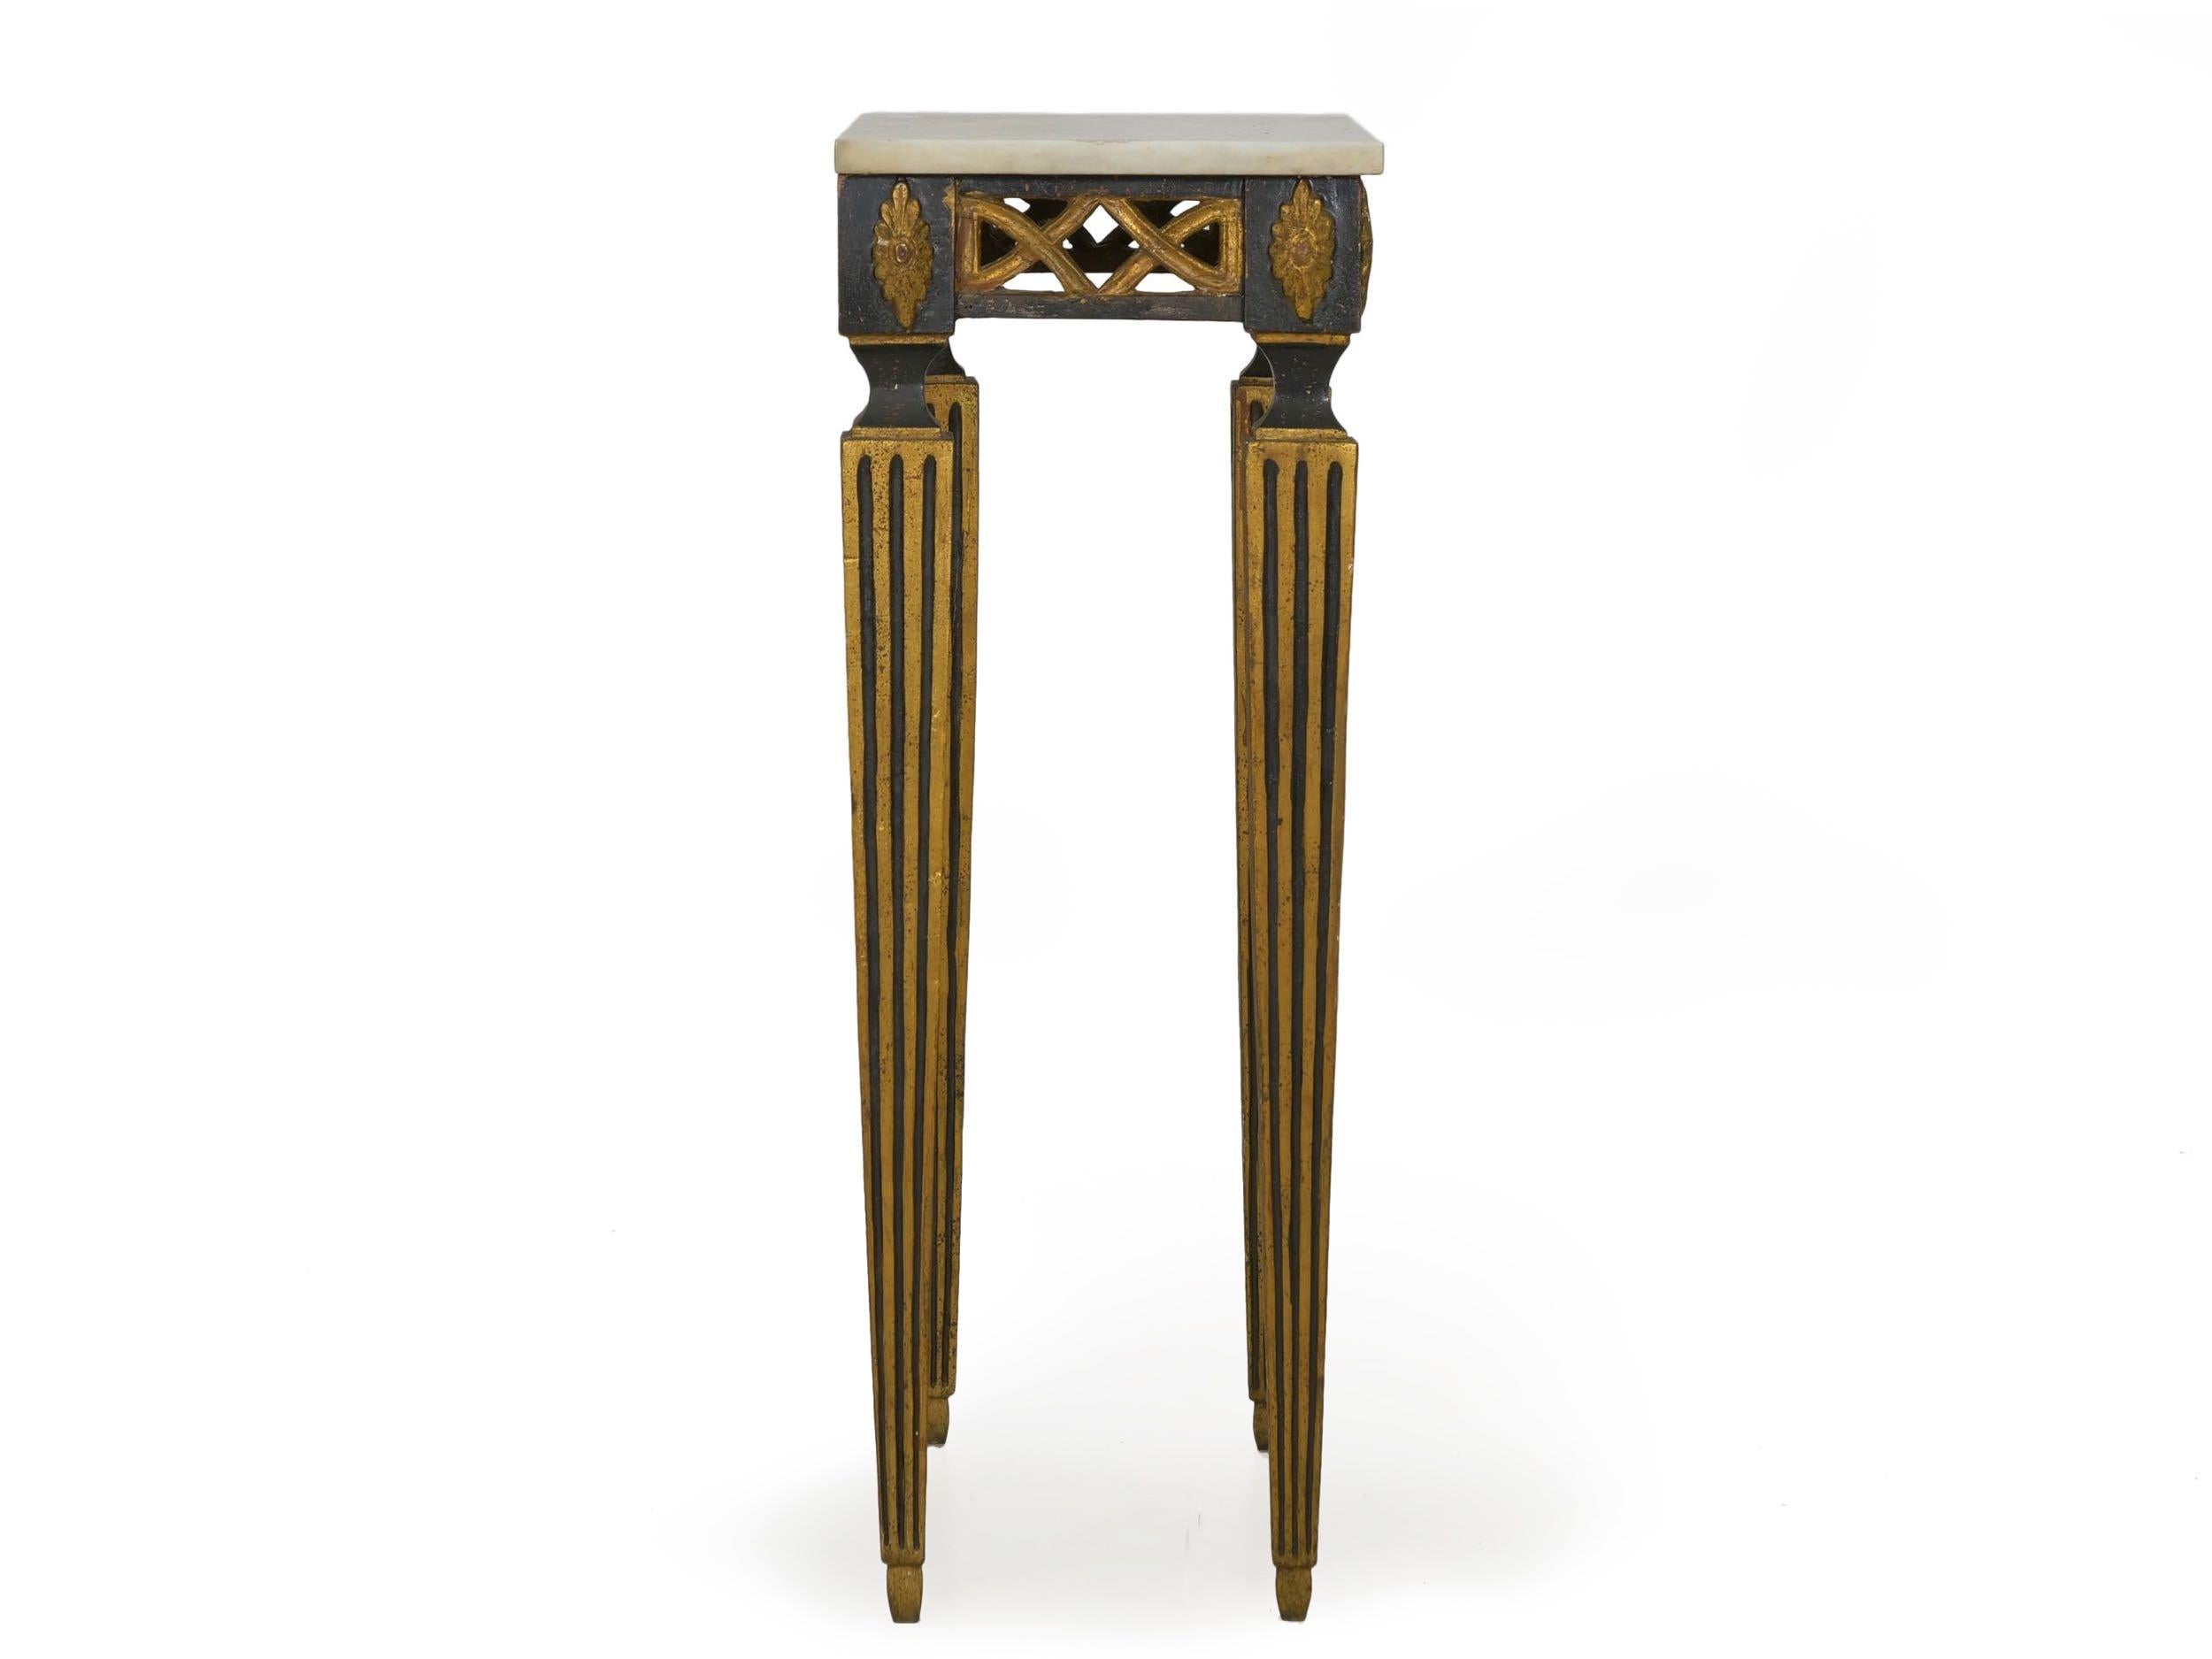 Italian Neoclassical Ebony Painted Marble-Top Console Table, 19th Century 1